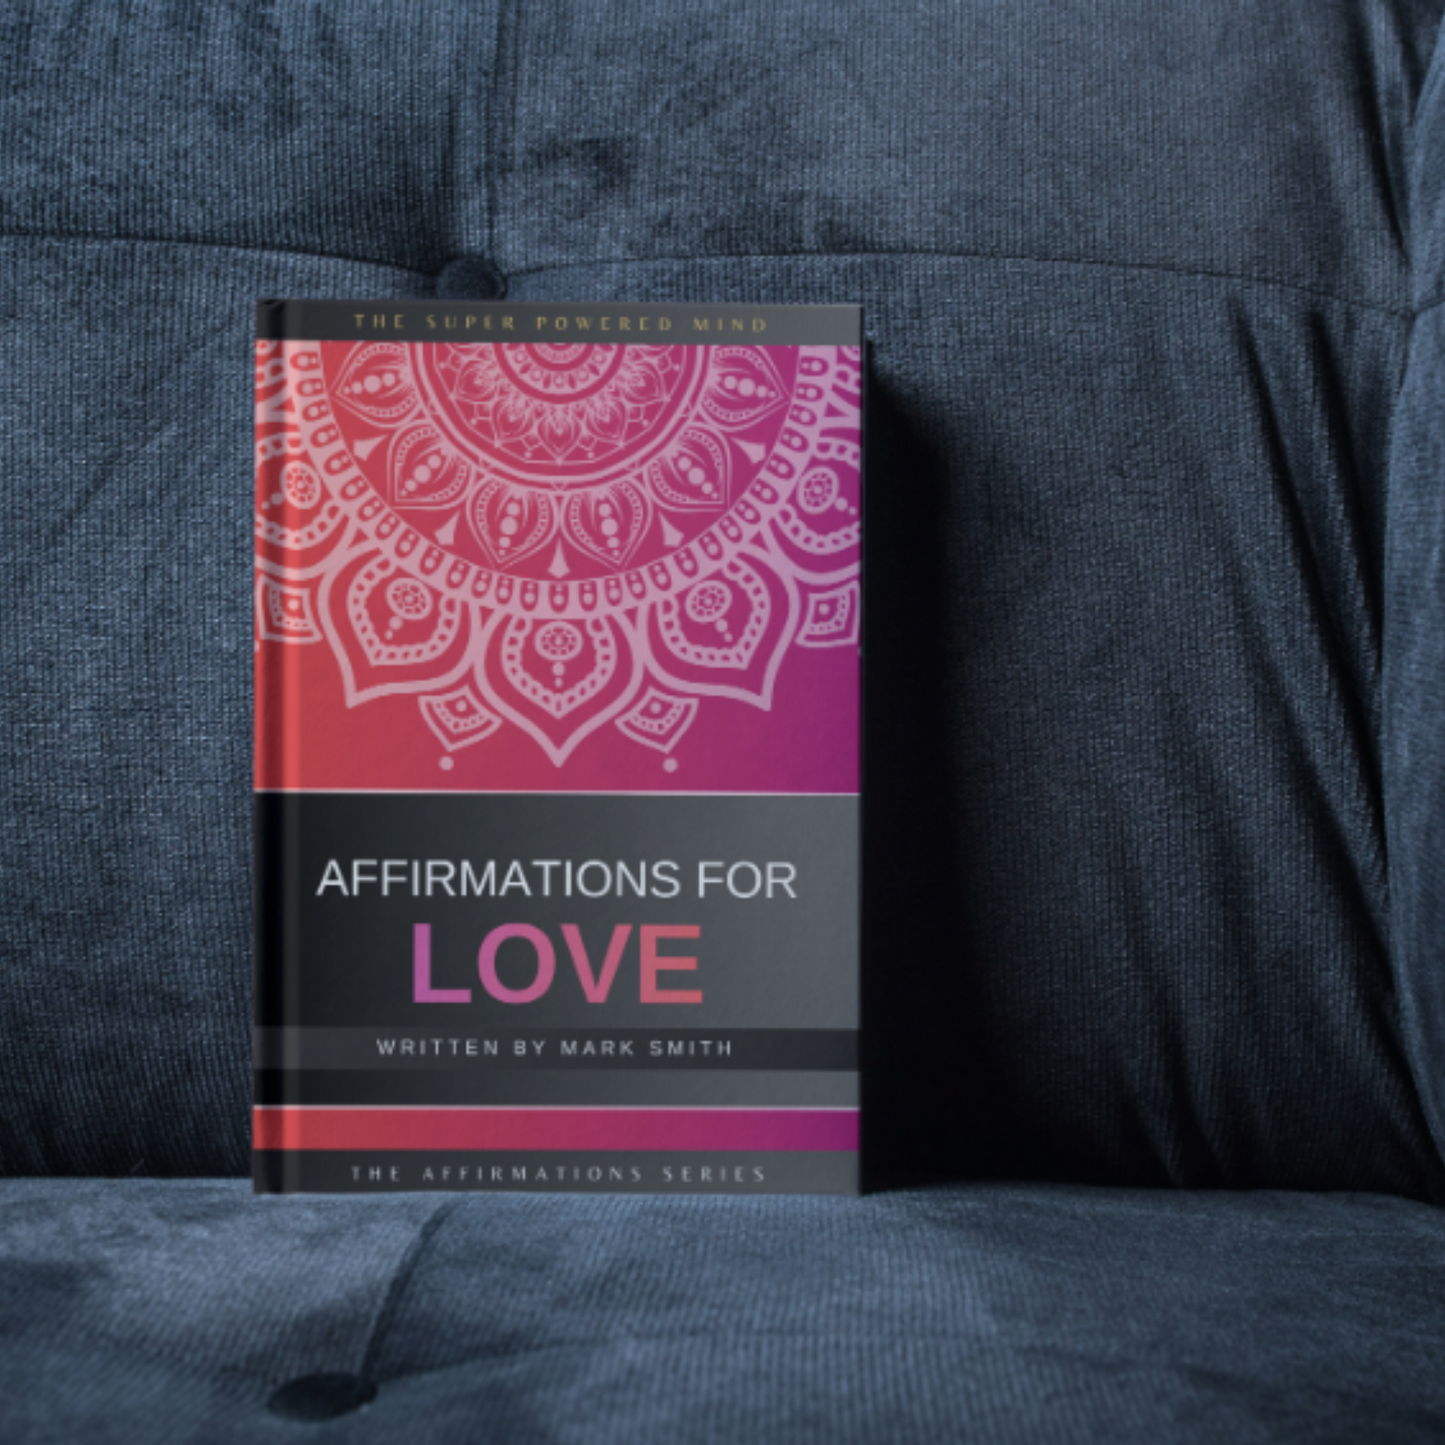 Affirmations for Love (The Affirmations Series) - Written by Mark Smith (Digital Download eBook)